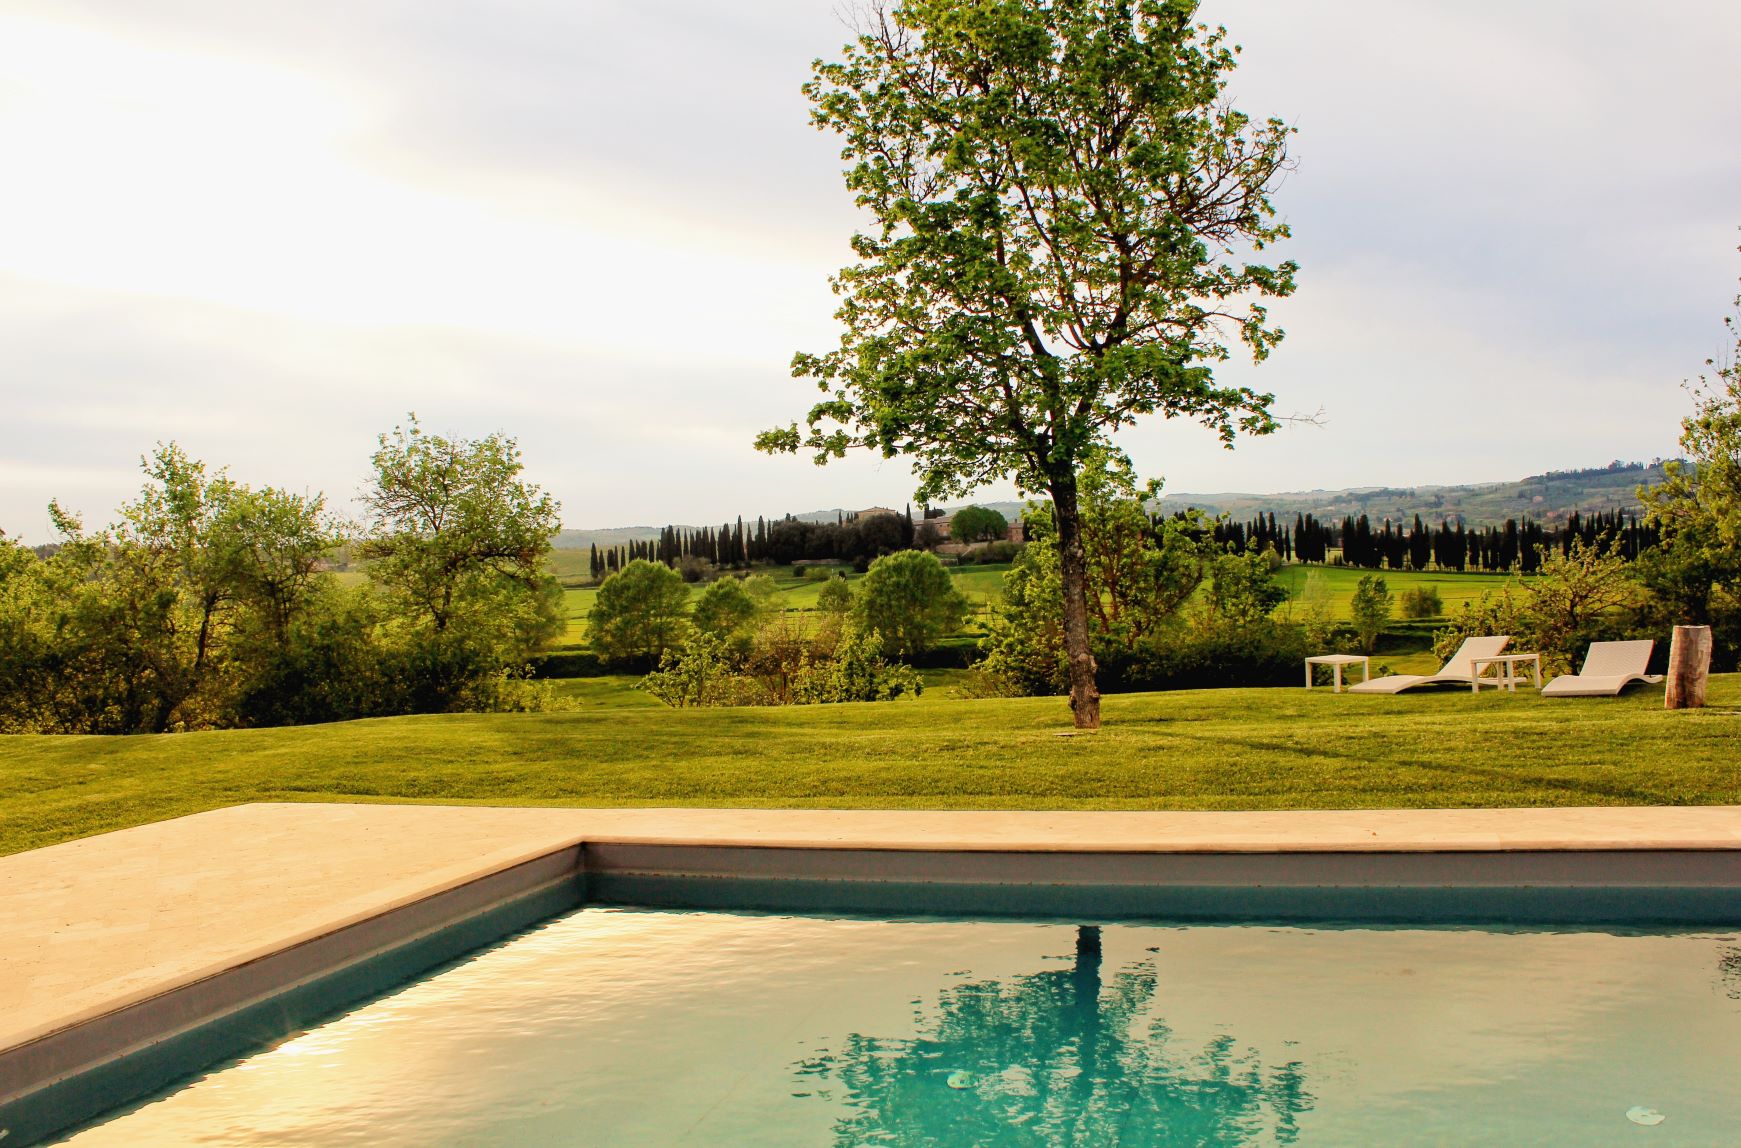 Best place to stay while in Tuscany is Siena House, a restored Italian villa near Montepulciano